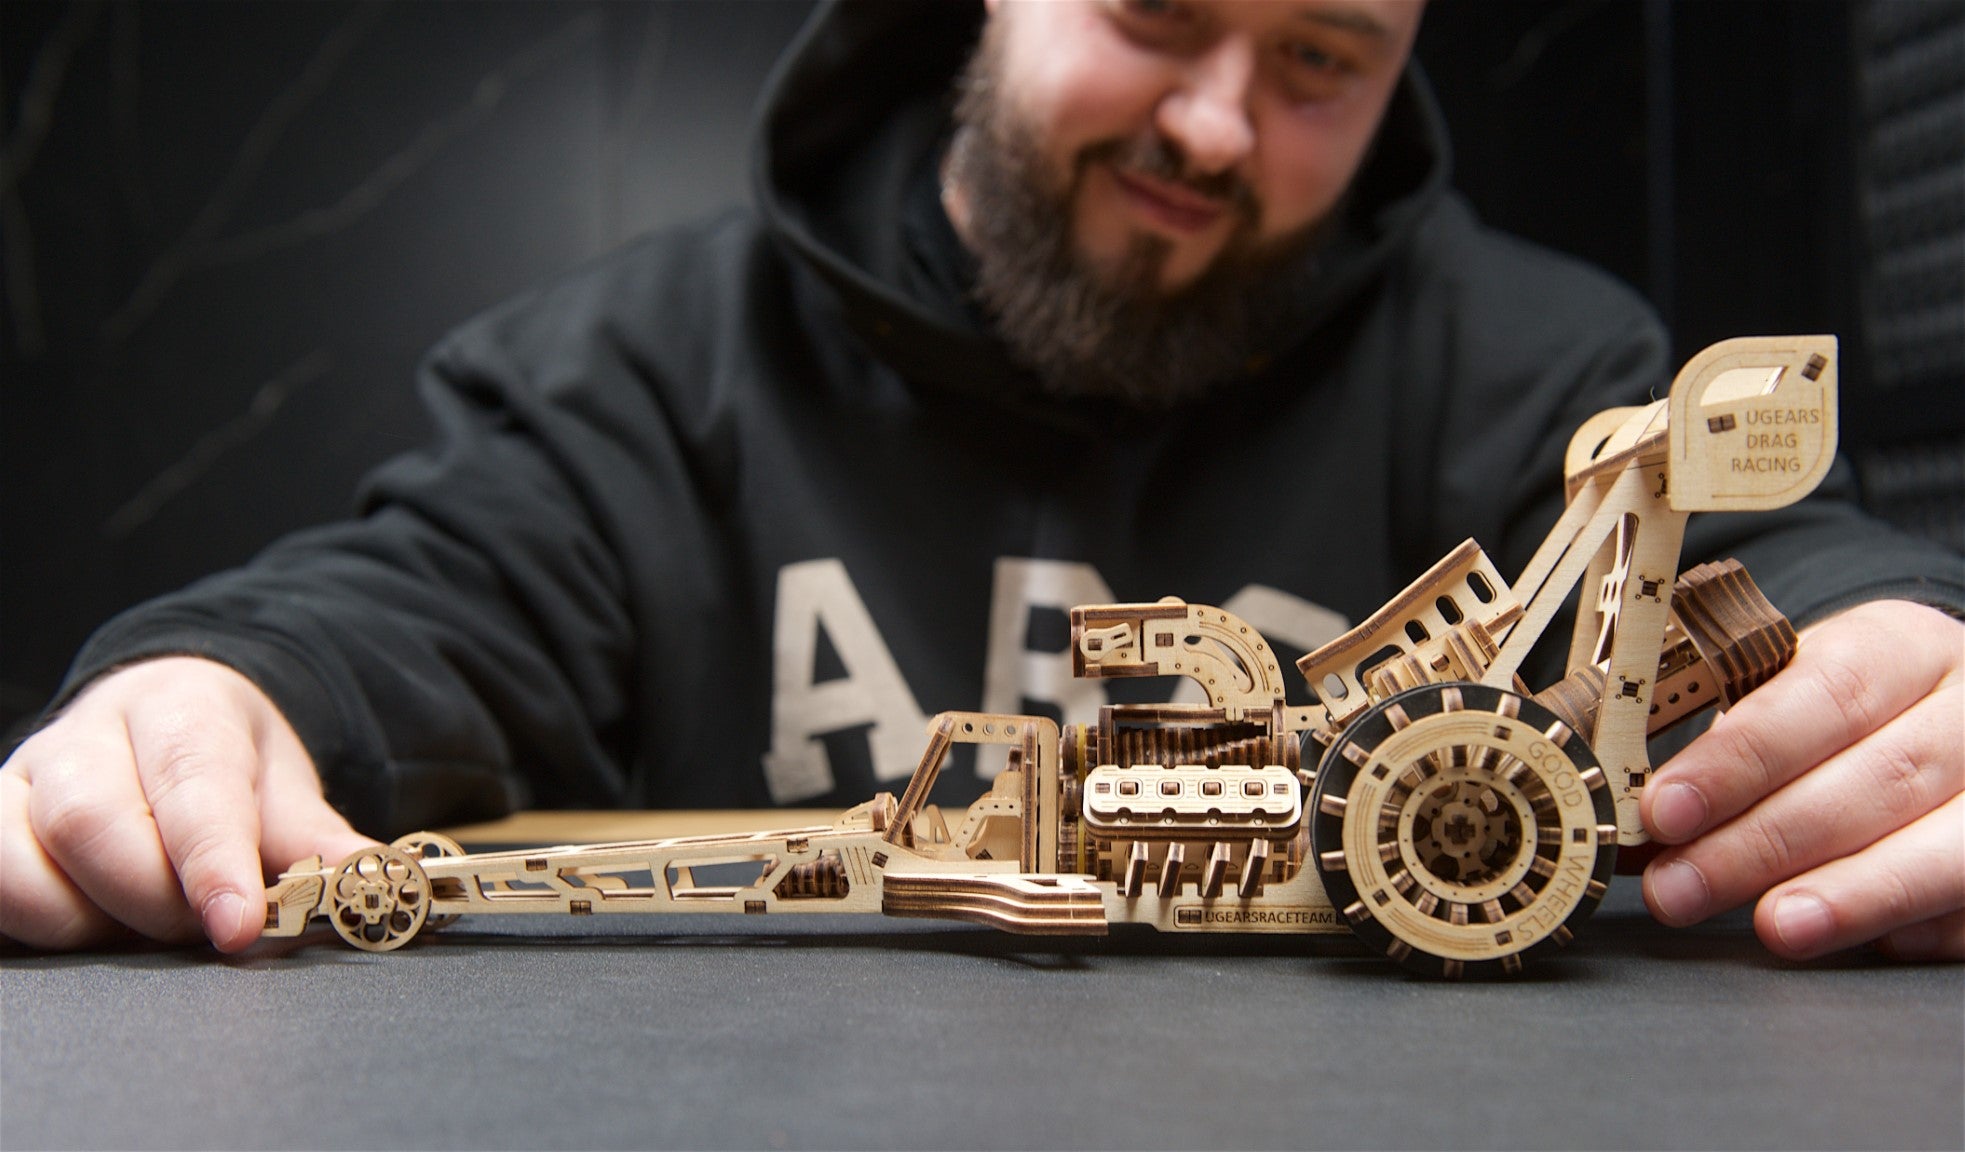 Ugears Dragster top fuel